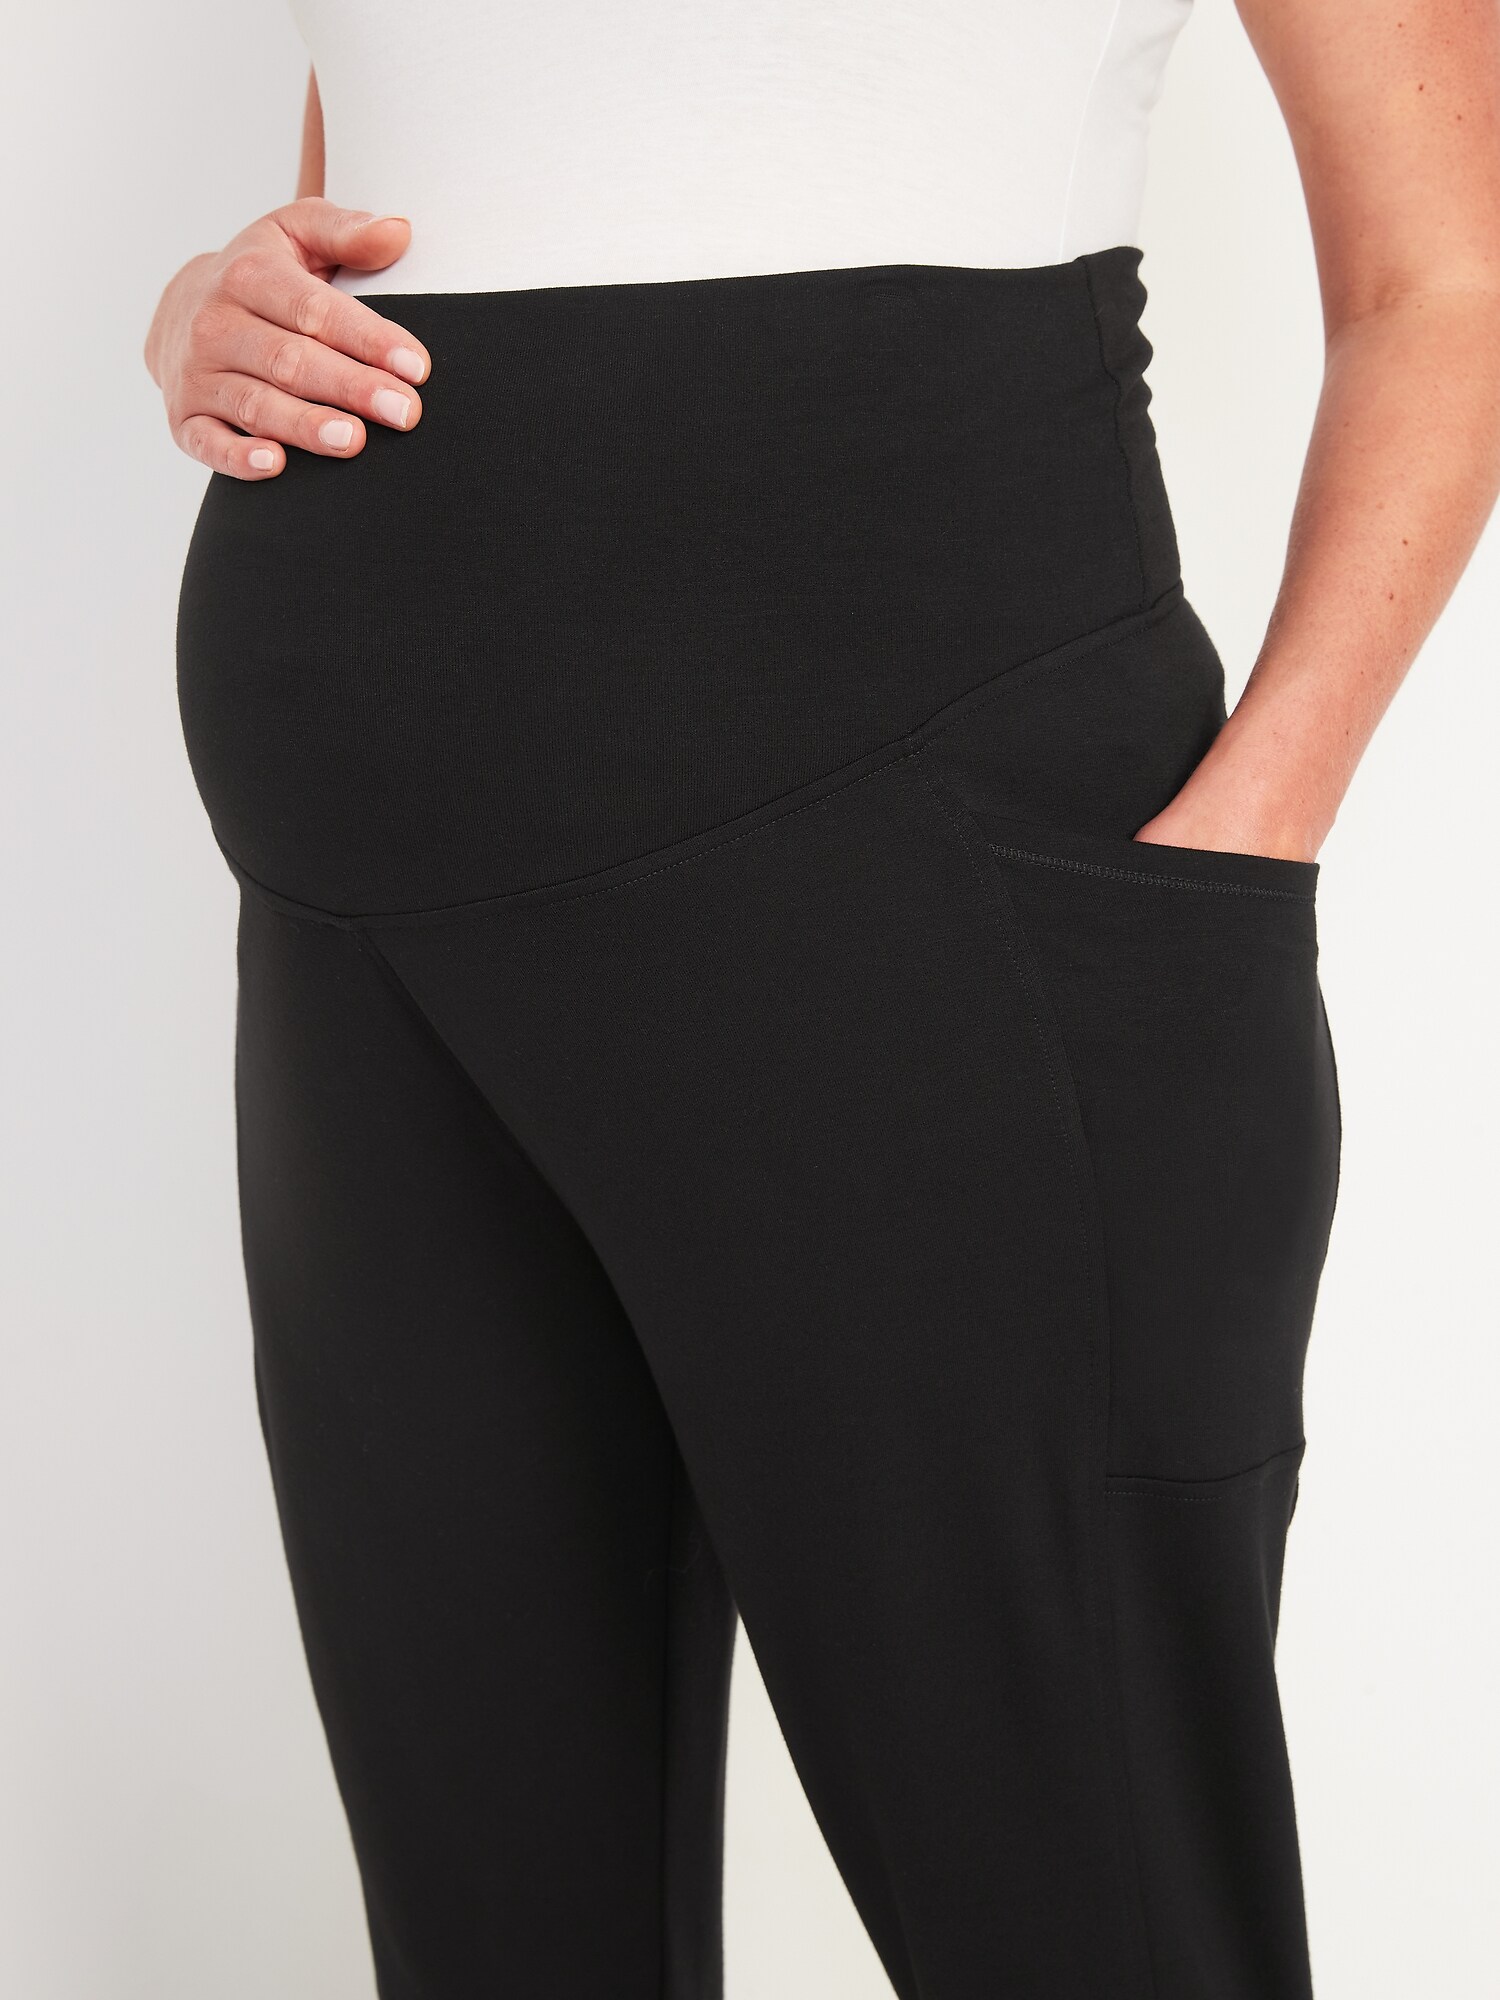 French Terry Maternity Yoga Pants